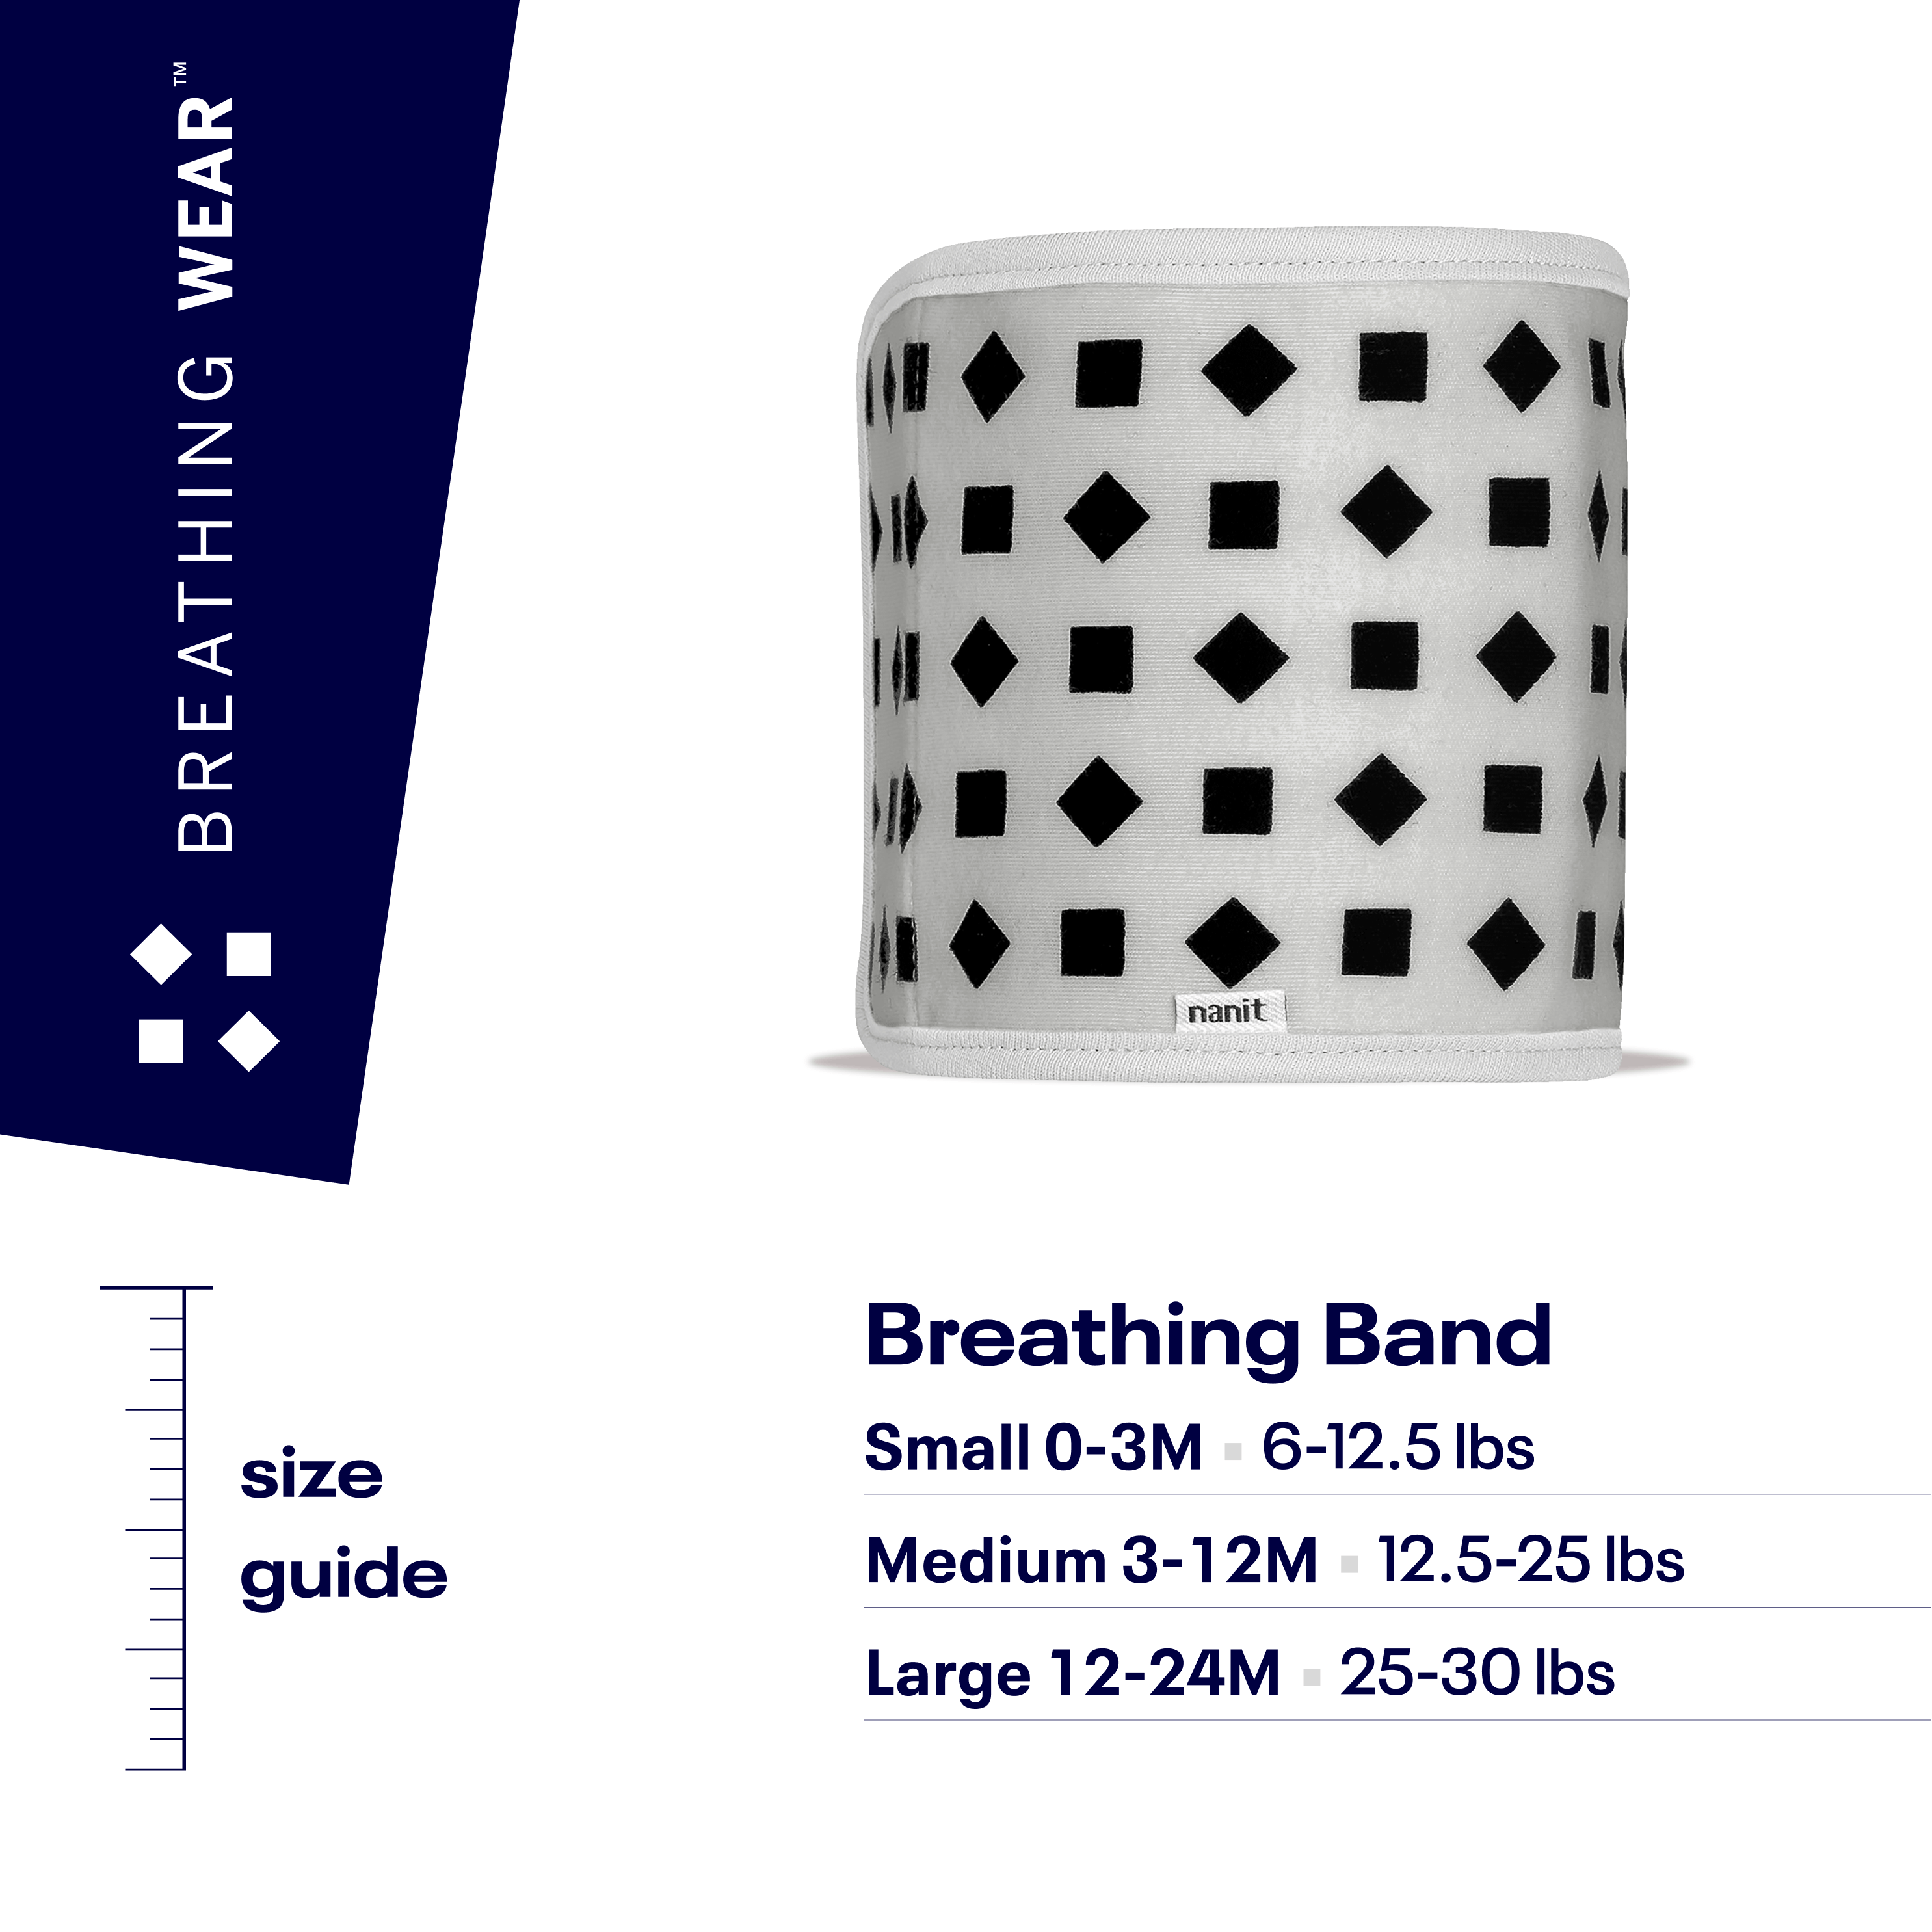 BREATHING BAND IMPERIAL